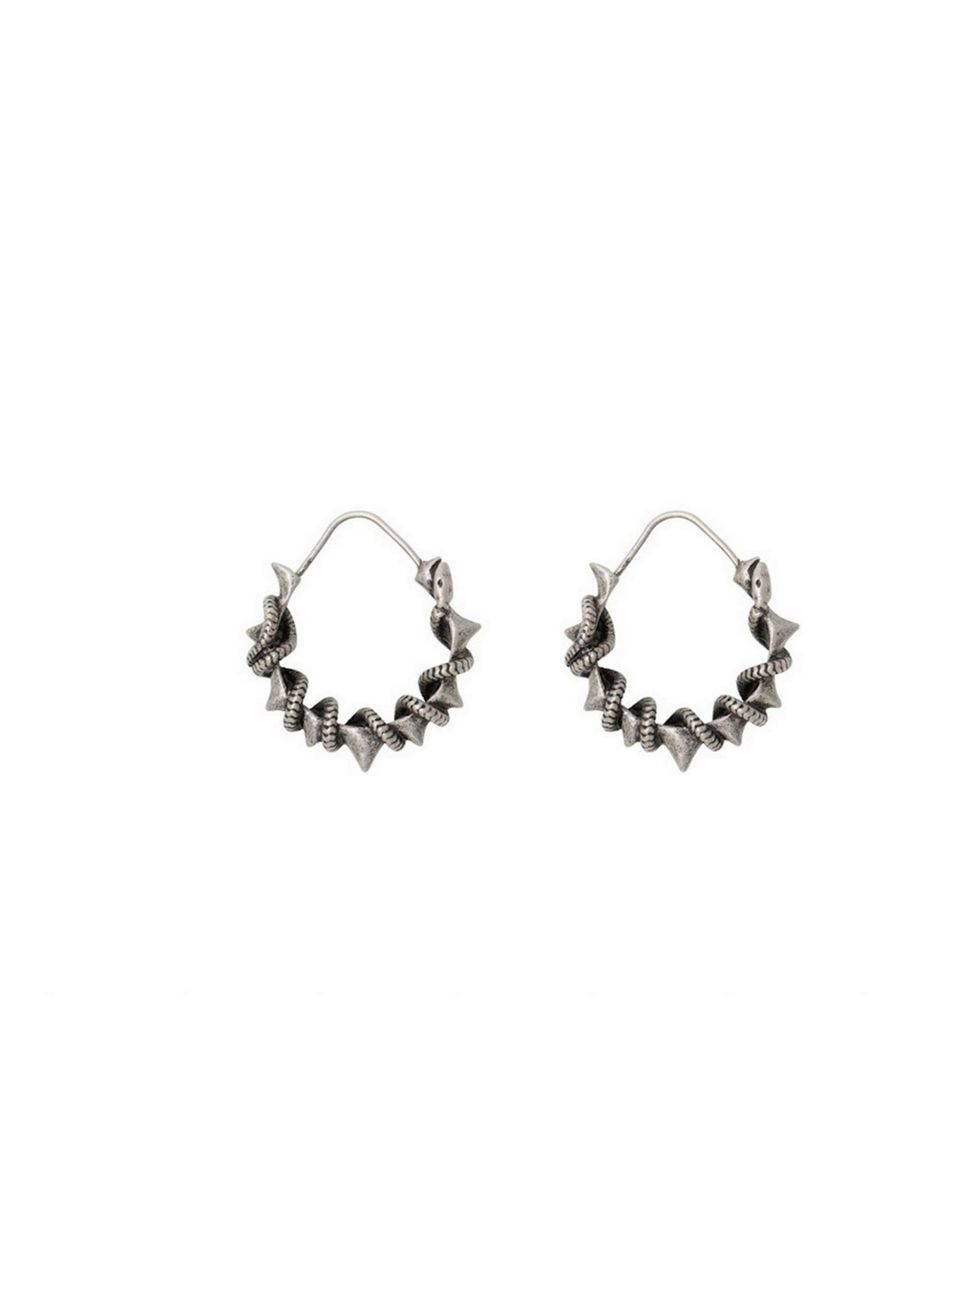 <p>Add some cool-girl hardware to your look with these amazing new Pamela Love for Zadig &amp; Voltaire earrings... <a href="http://www.zadig-et-voltaire.com/eu/uk/earrings-woman-boucles-d-oreilles-serpent-pamela-love-for-z-v-boucles-d-oreilles-serpent-pa